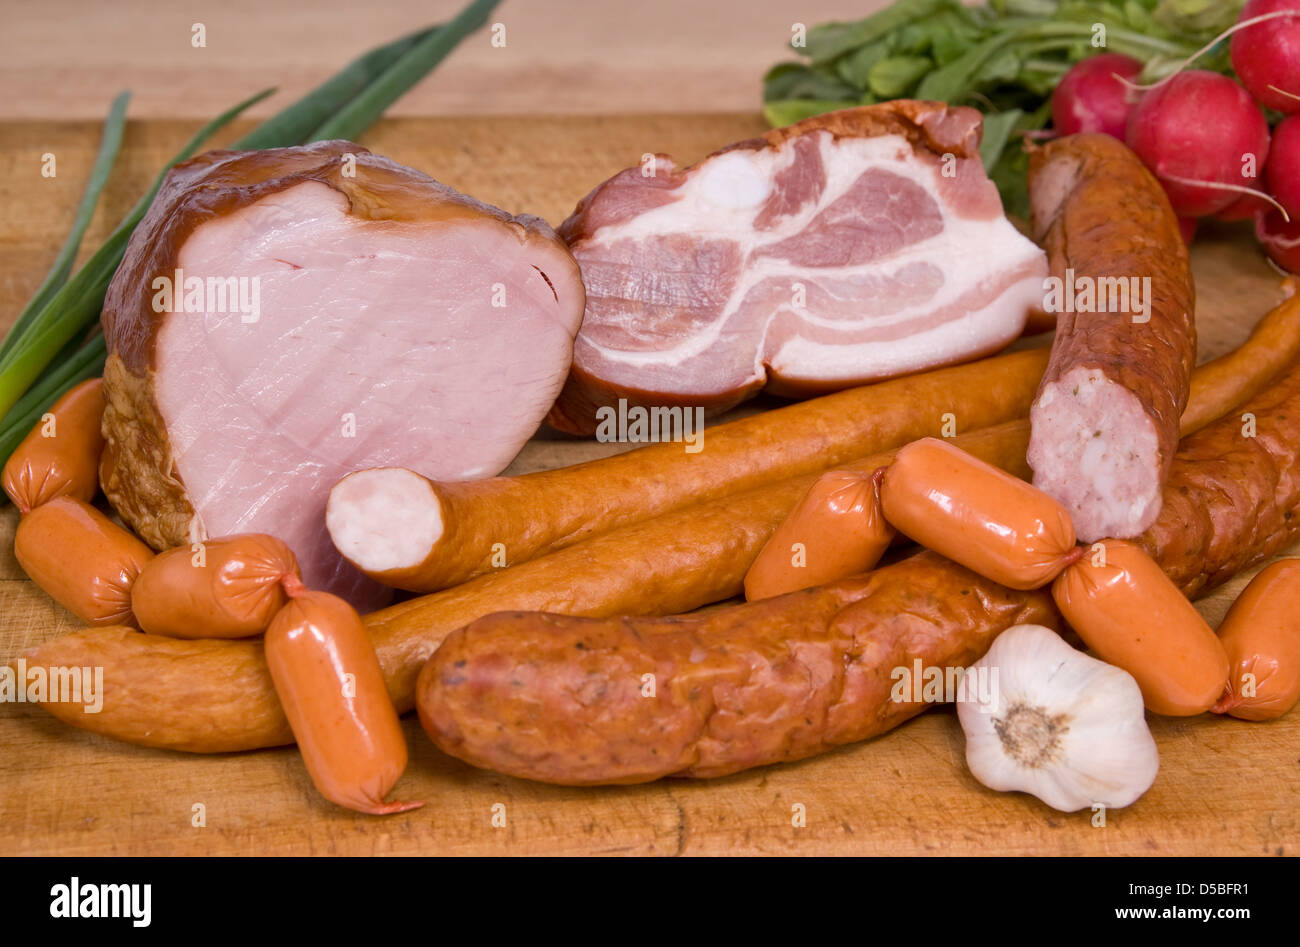 different species of hams and sausage on board Stock Photo